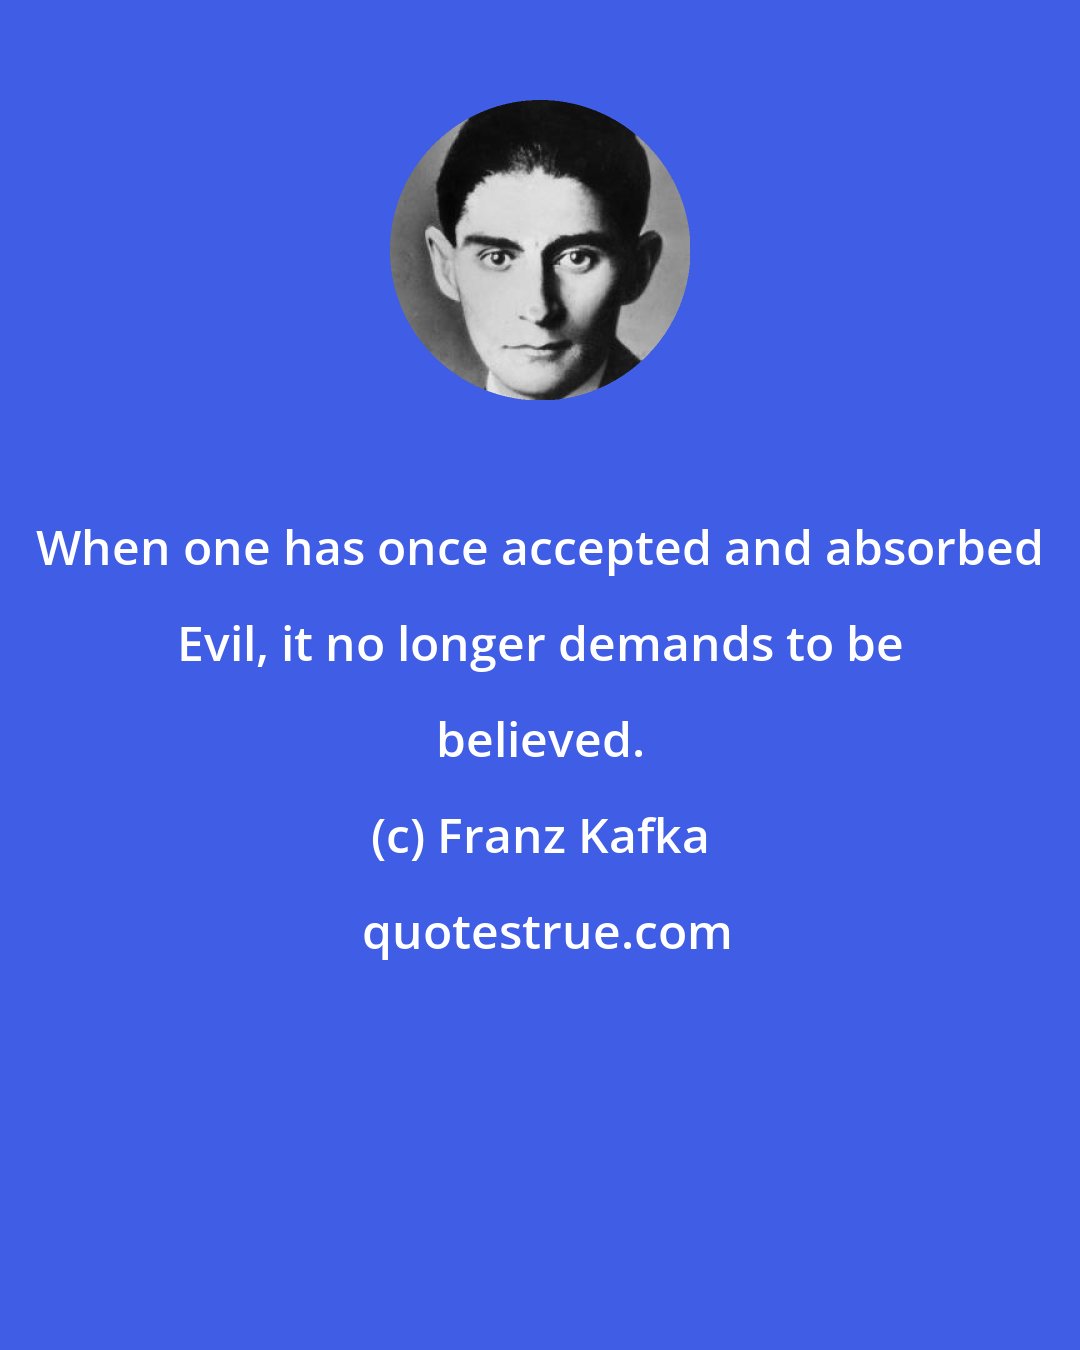 Franz Kafka: When one has once accepted and absorbed Evil, it no longer demands to be believed.